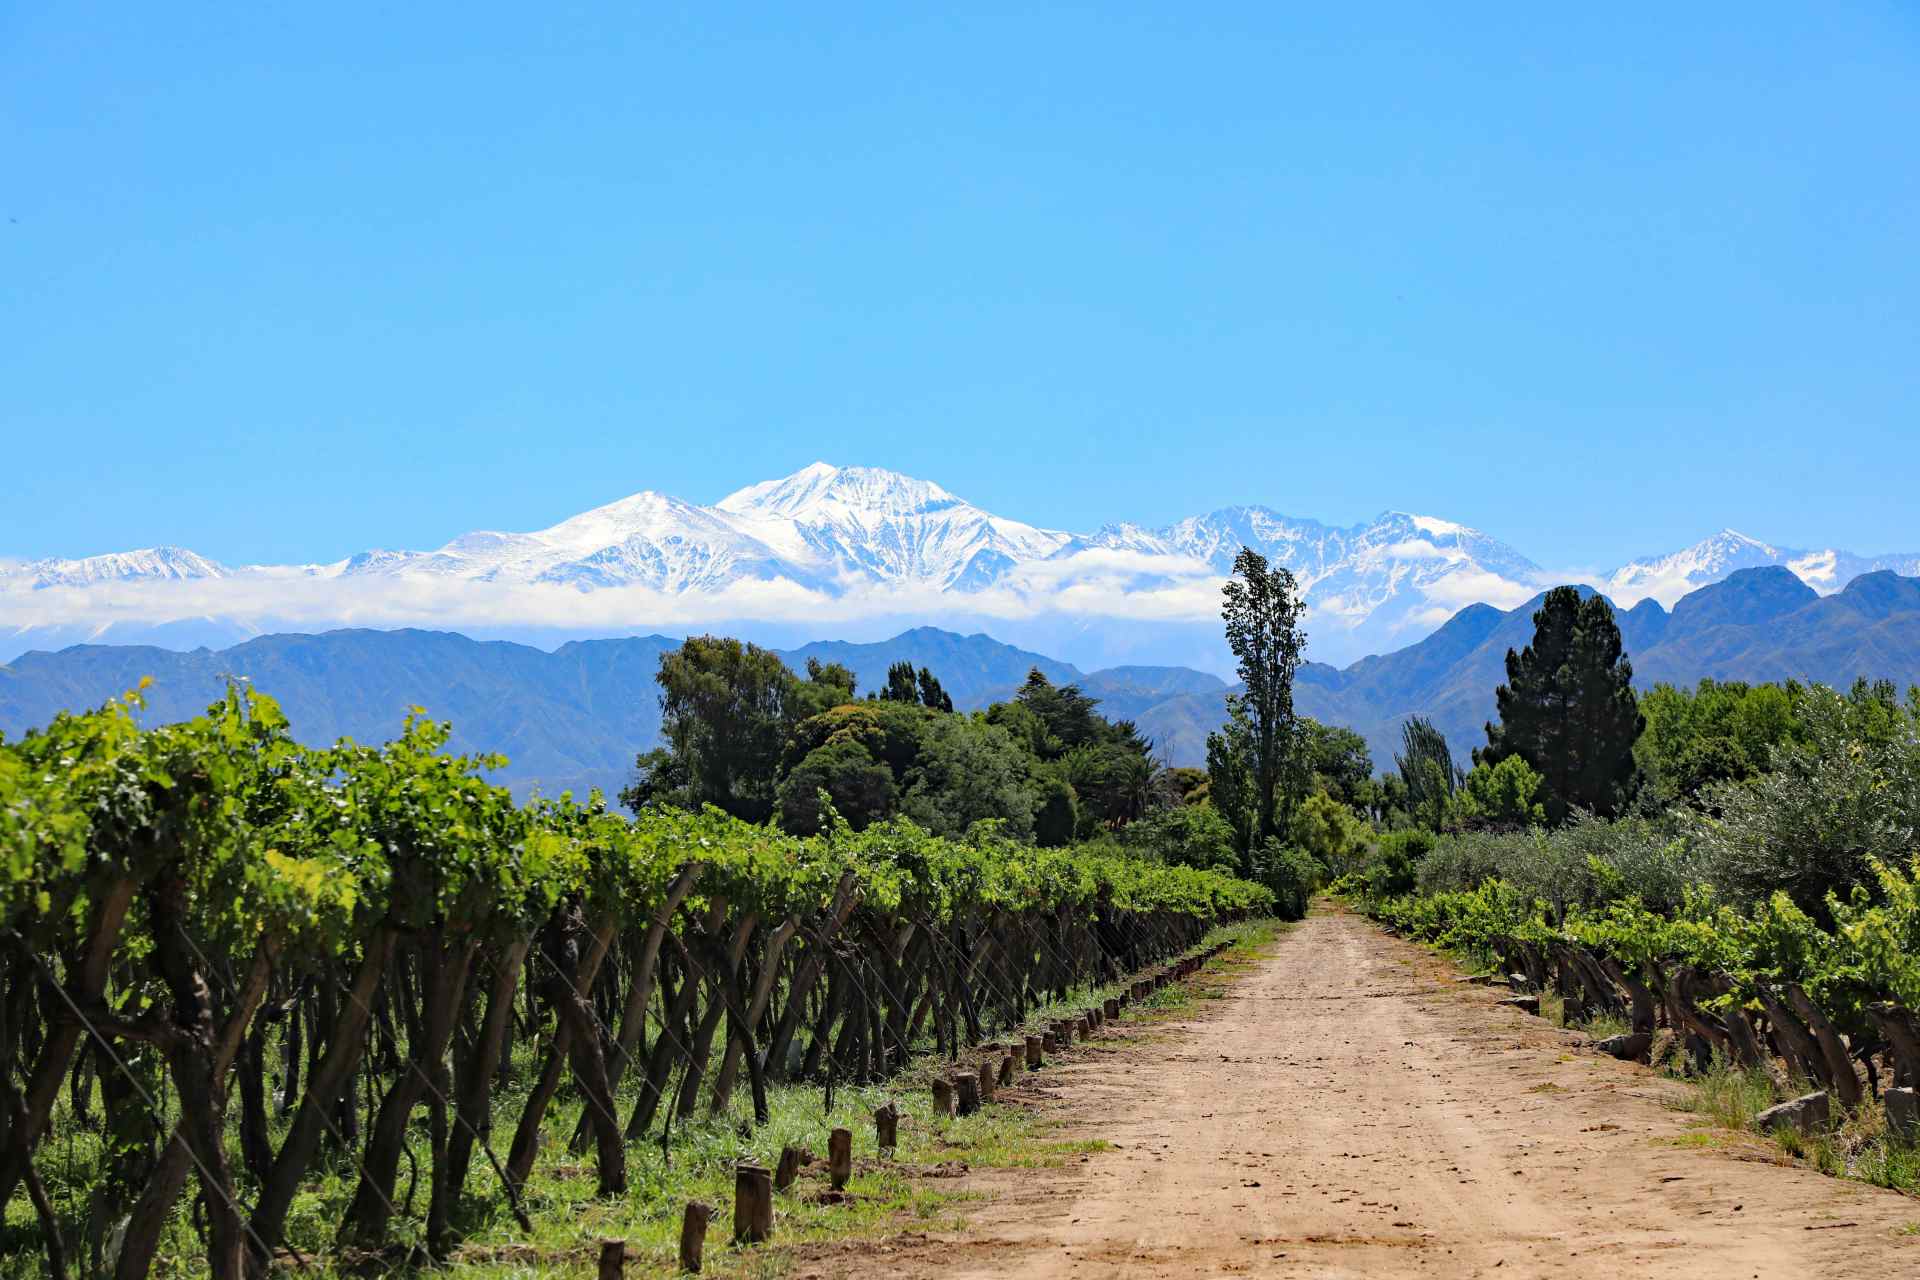 Snow capped Andes mountains and vineyard growing malbec grapes in the Mendoza wine country of Argentina. Photo Credit: Thomas Barrat/Shutterstock